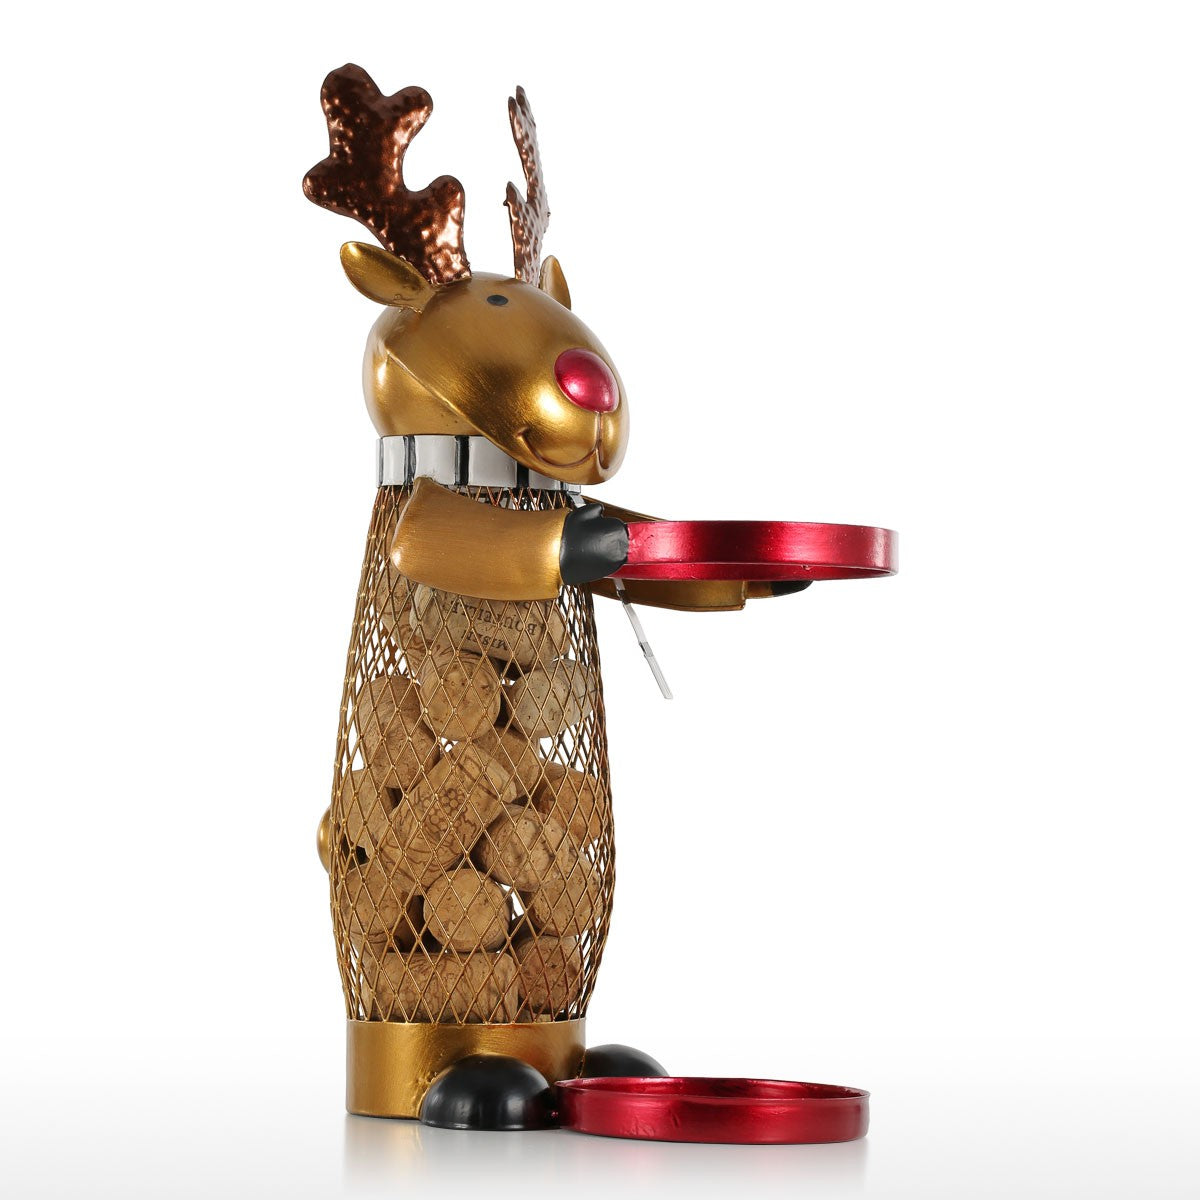 Simply the cutest reindeer wine bottle holder you'll ever see